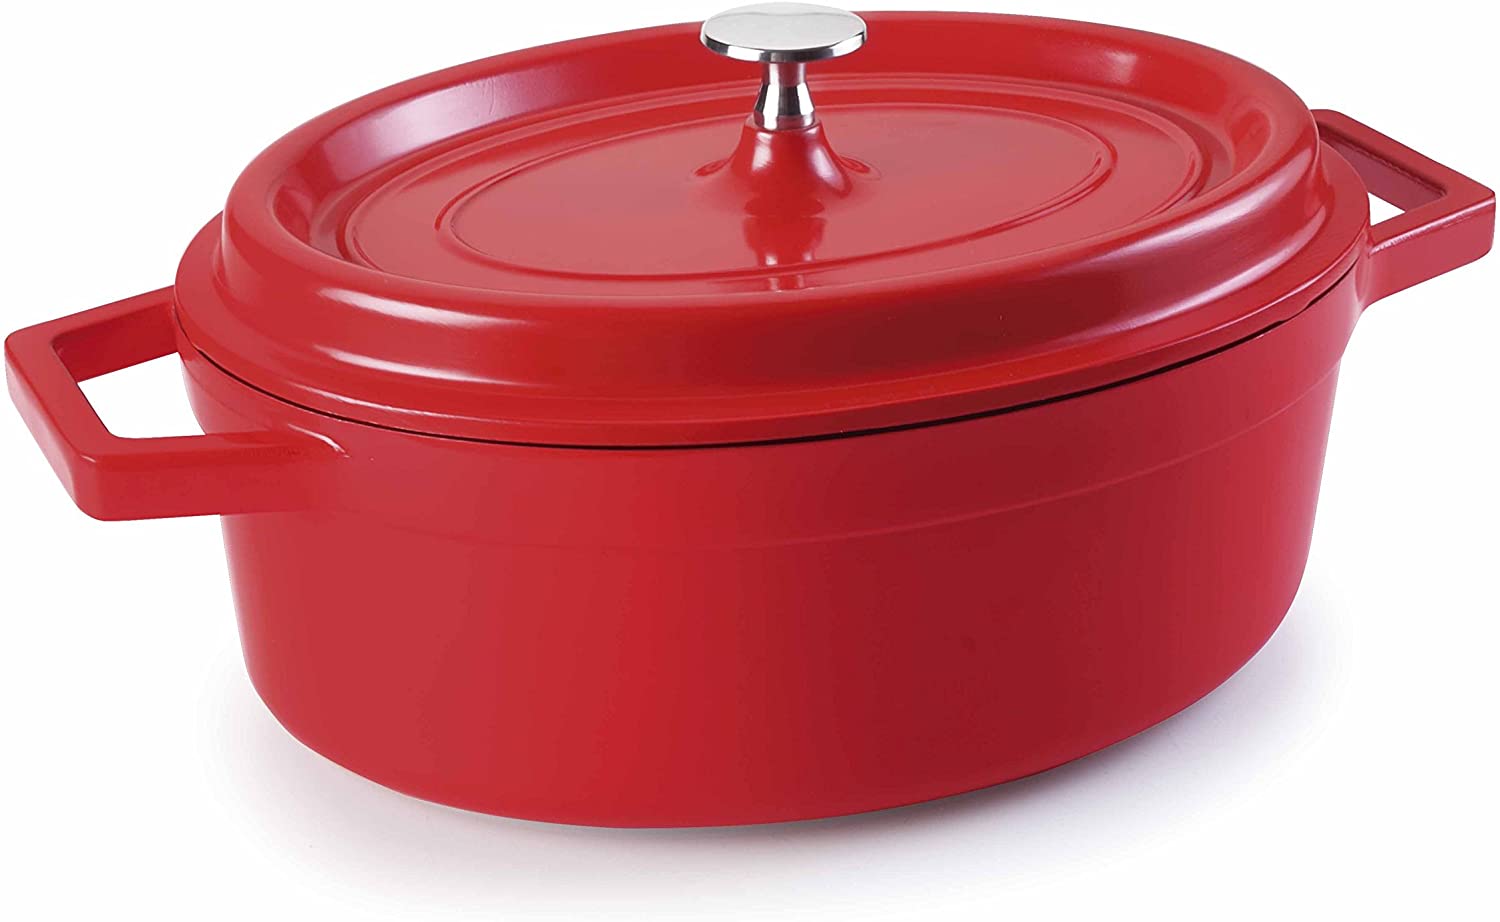 Lacor 25931 Dutch Oven Cast Aluminium Oval With Lid 31Cm Red